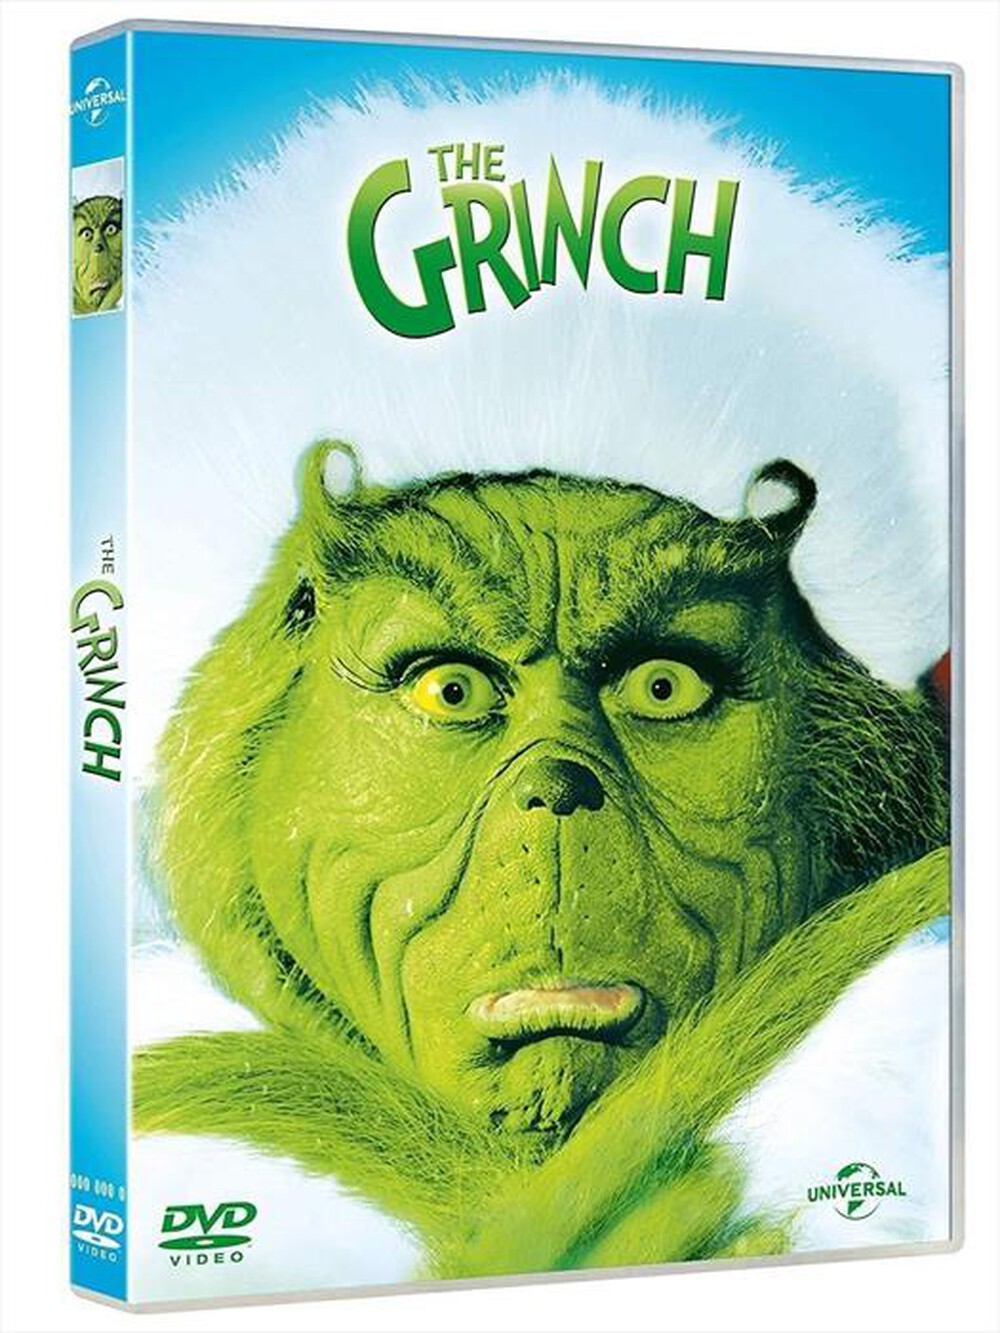 "WARNER HOME VIDEO - Grinch (The)"